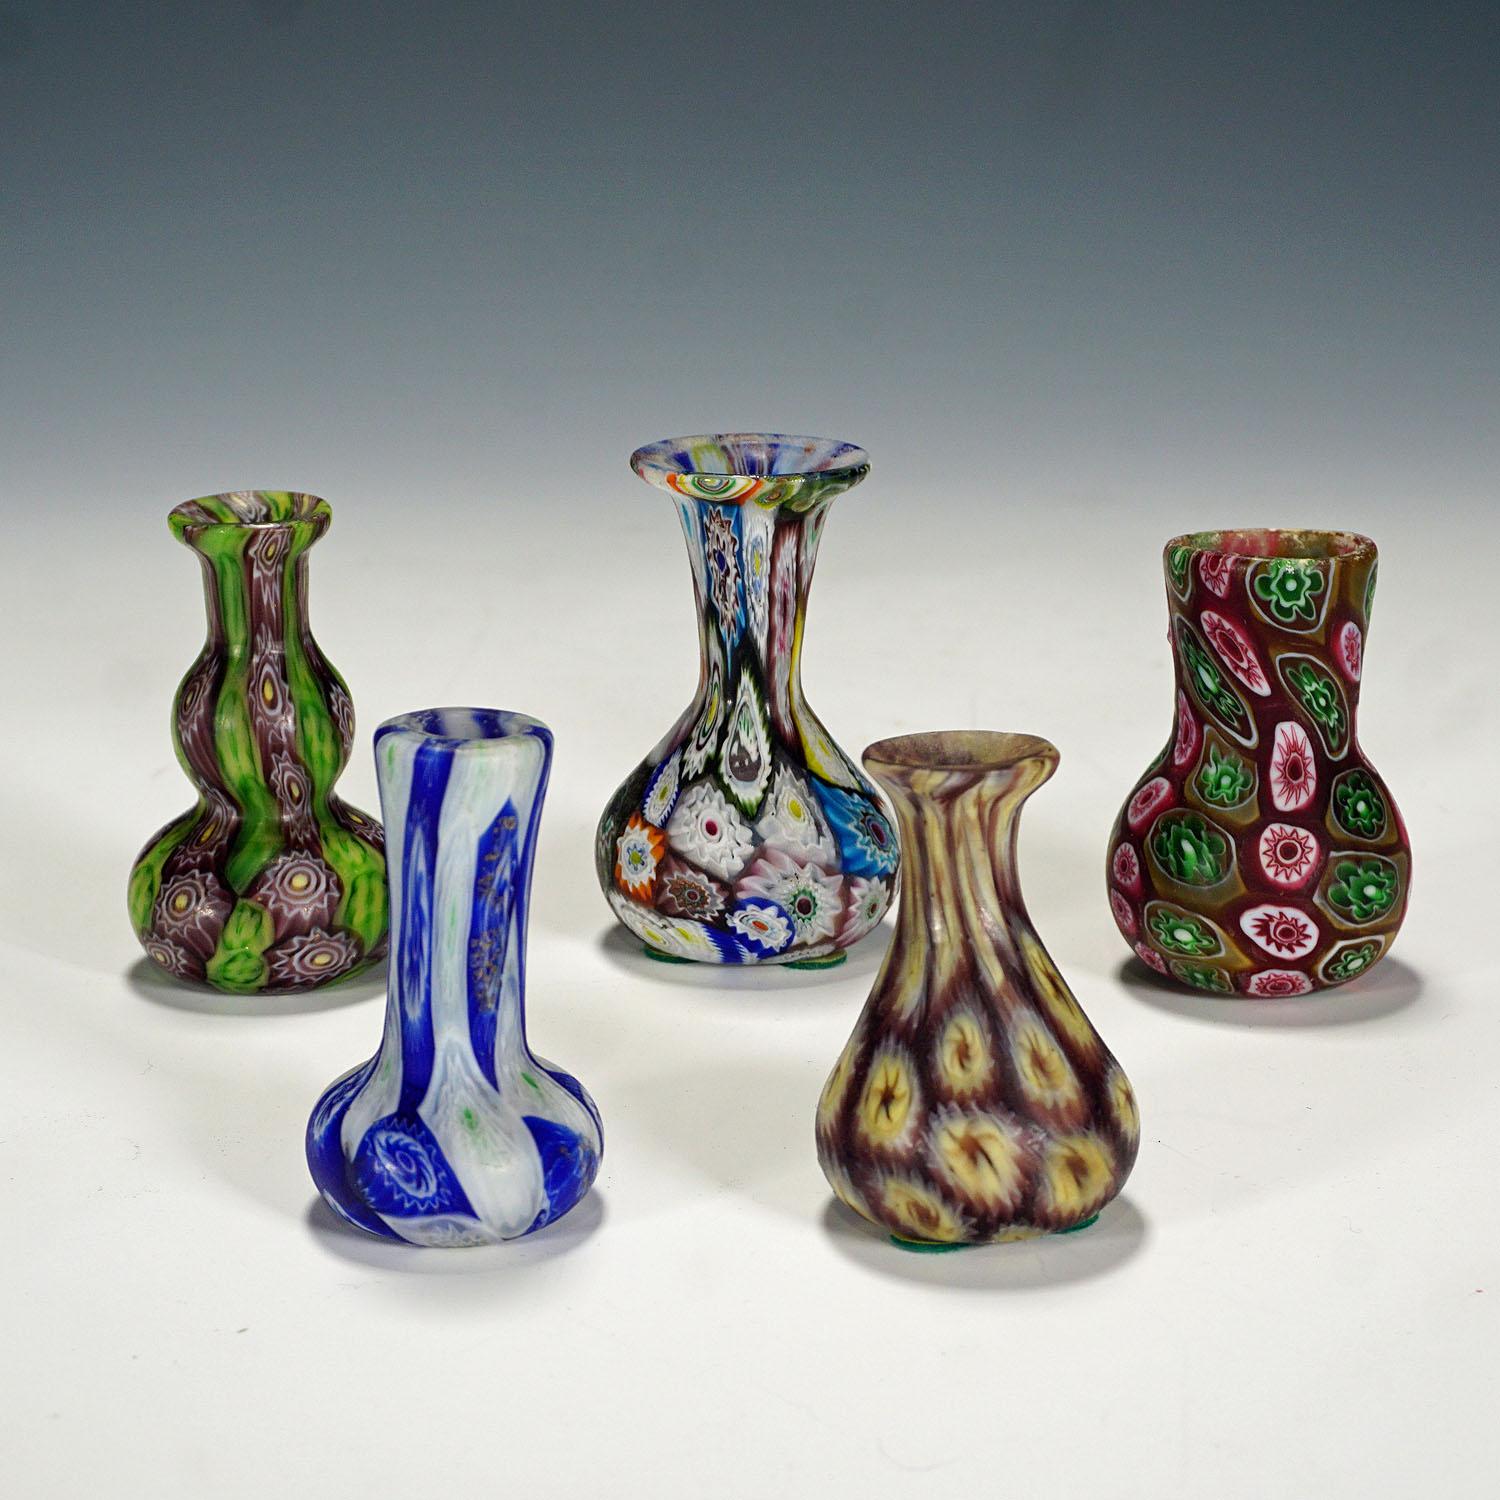 A set of five small murrine glass vases, manufactured by Vetreria Fratelli Toso around 1910. The vases are executed with polychrome multicoloured millefiori murrines and have an acid etched matte finish. The vases are authentic examples of early